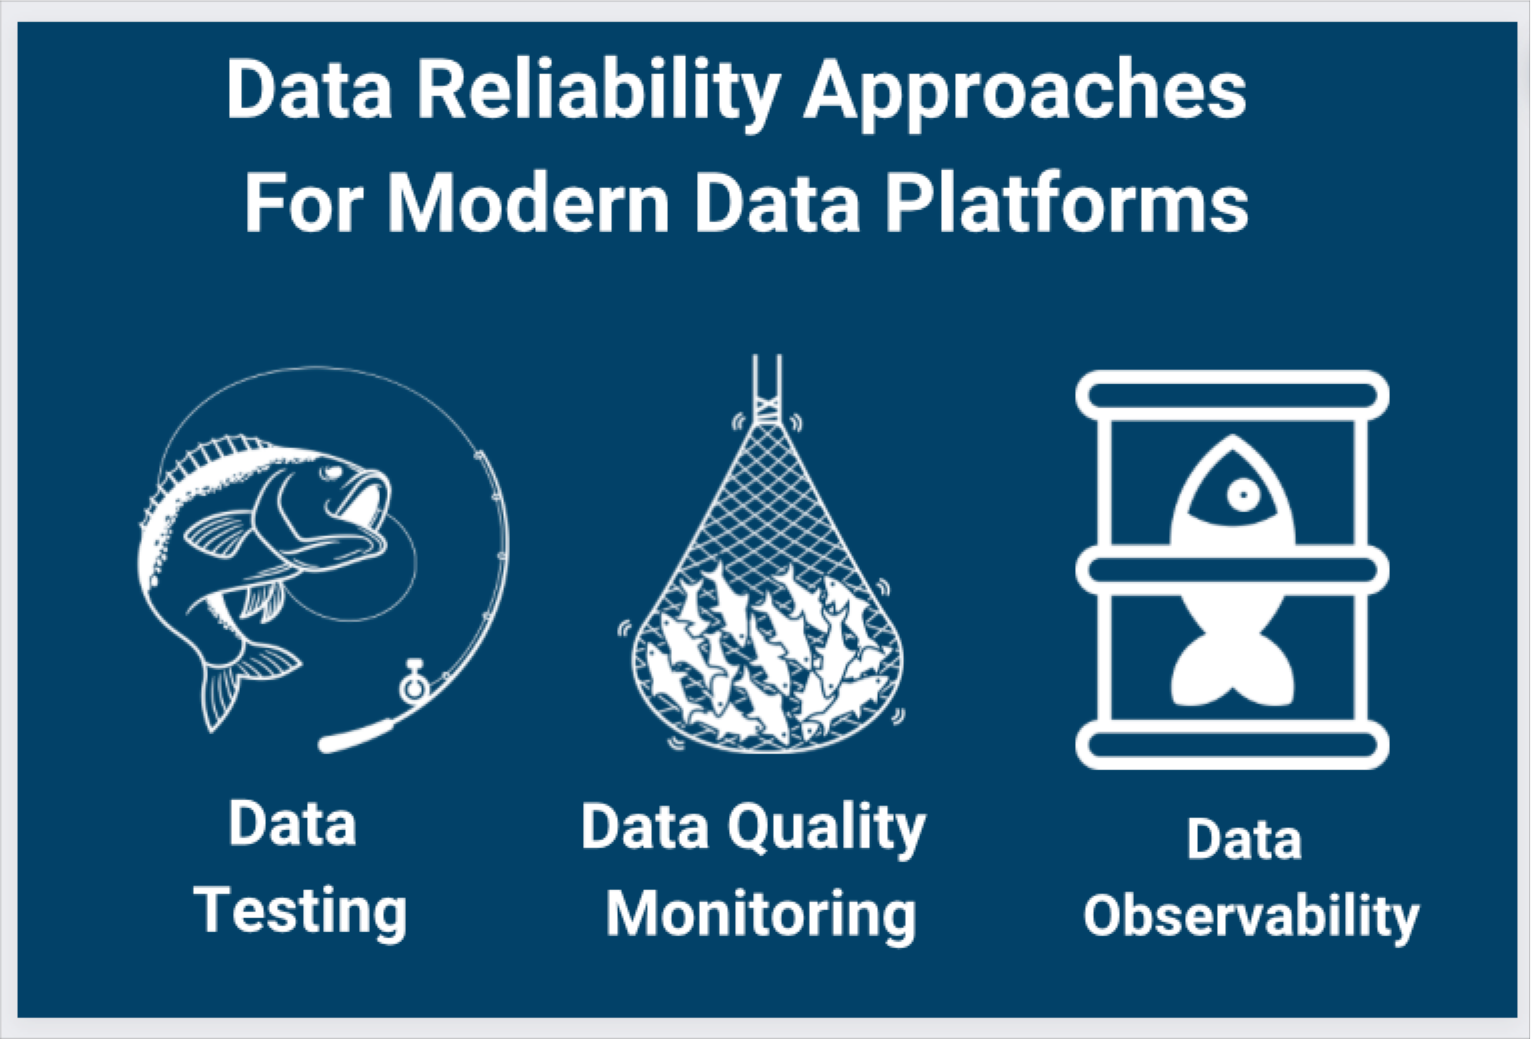 Data reliability approaches for modern data platforms